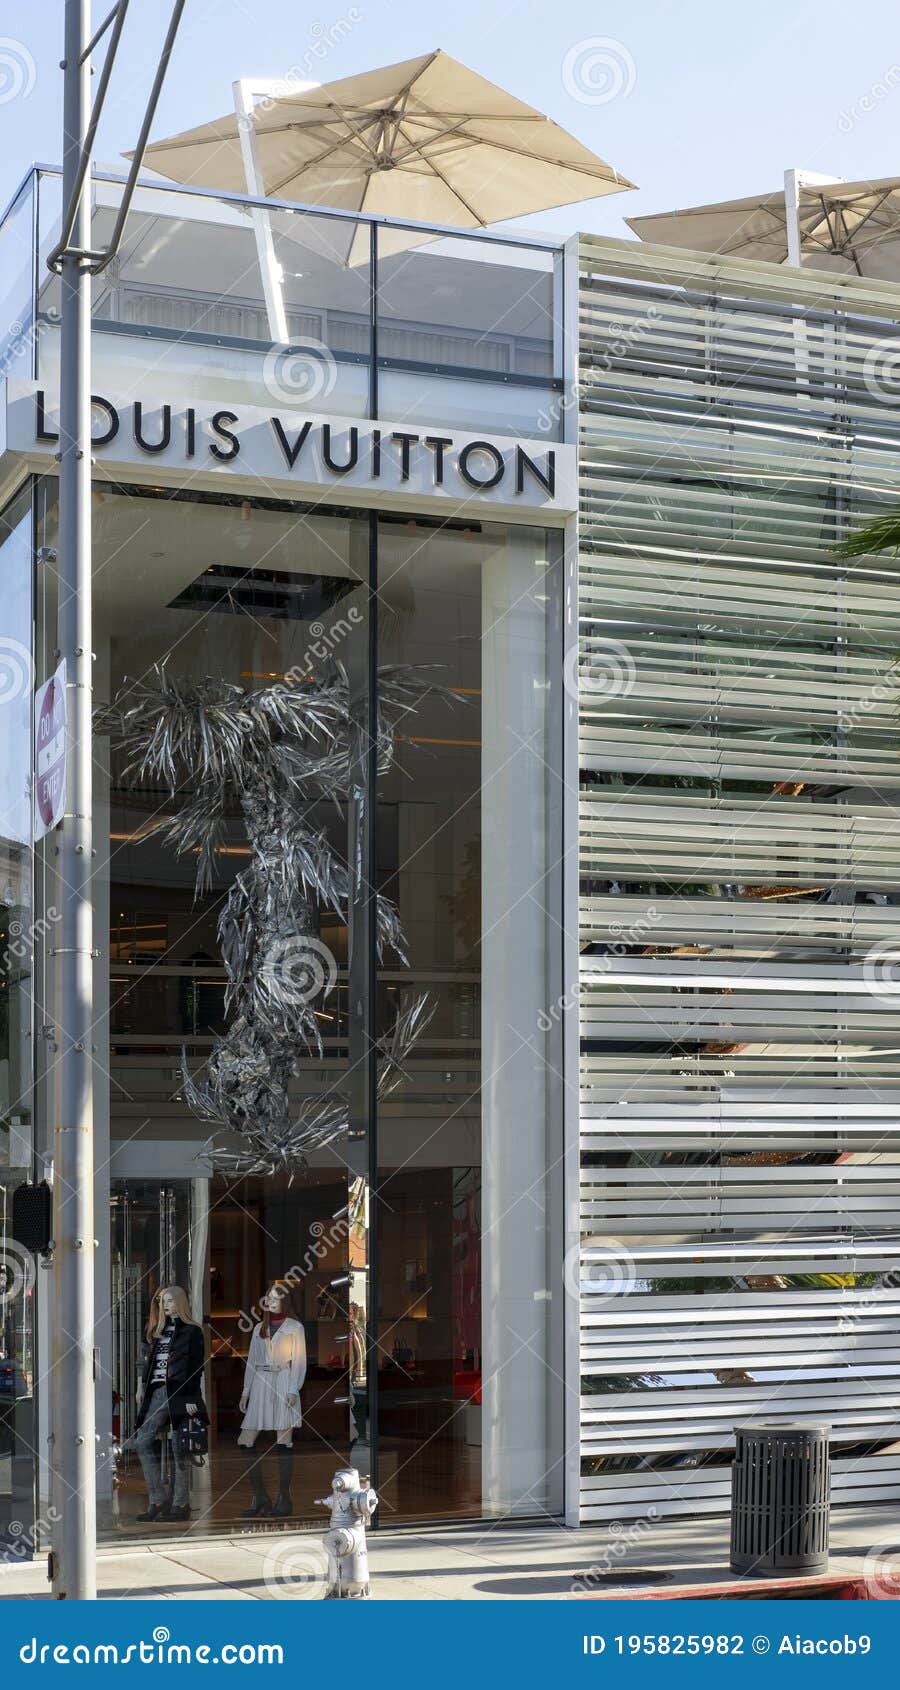 Louis Vuitton X, a Shoppable Pop Up Exhibit, Opens in Beverly